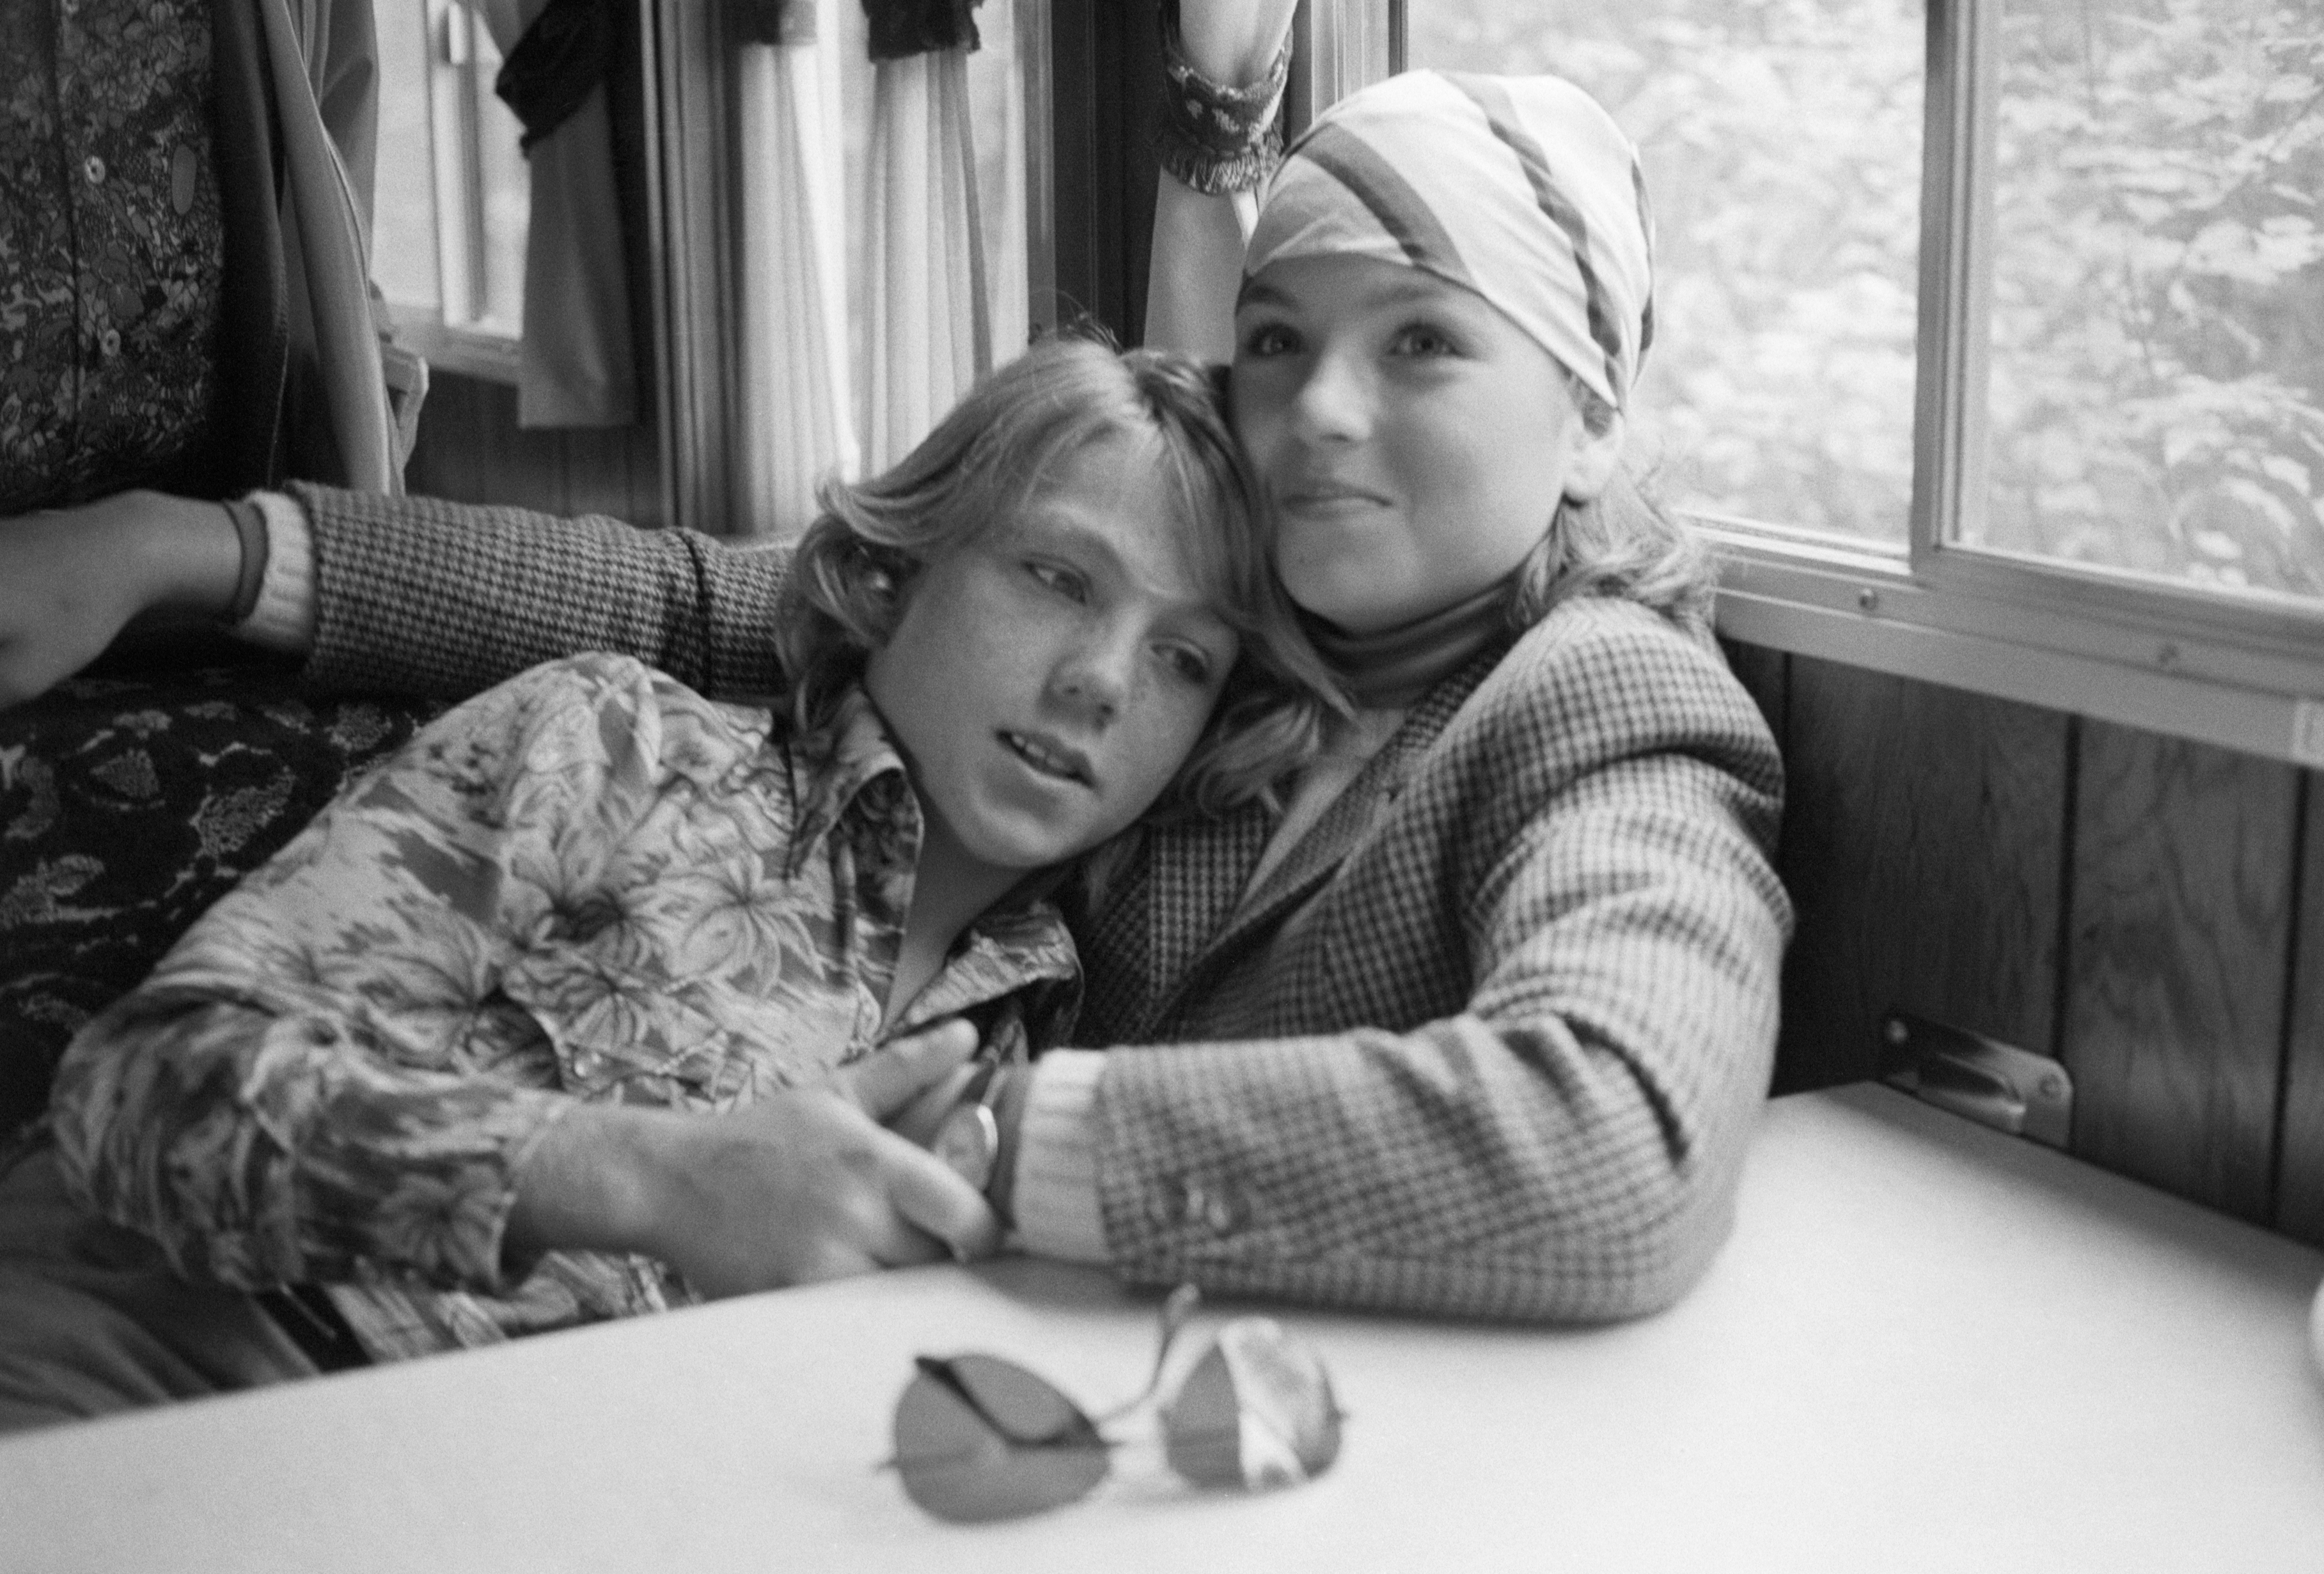 Griffin O'Neal, 12, leans on shoulder of sister Tatum O'Neal during visit to her mobile dressing room, 1977.| Source: Getty Images